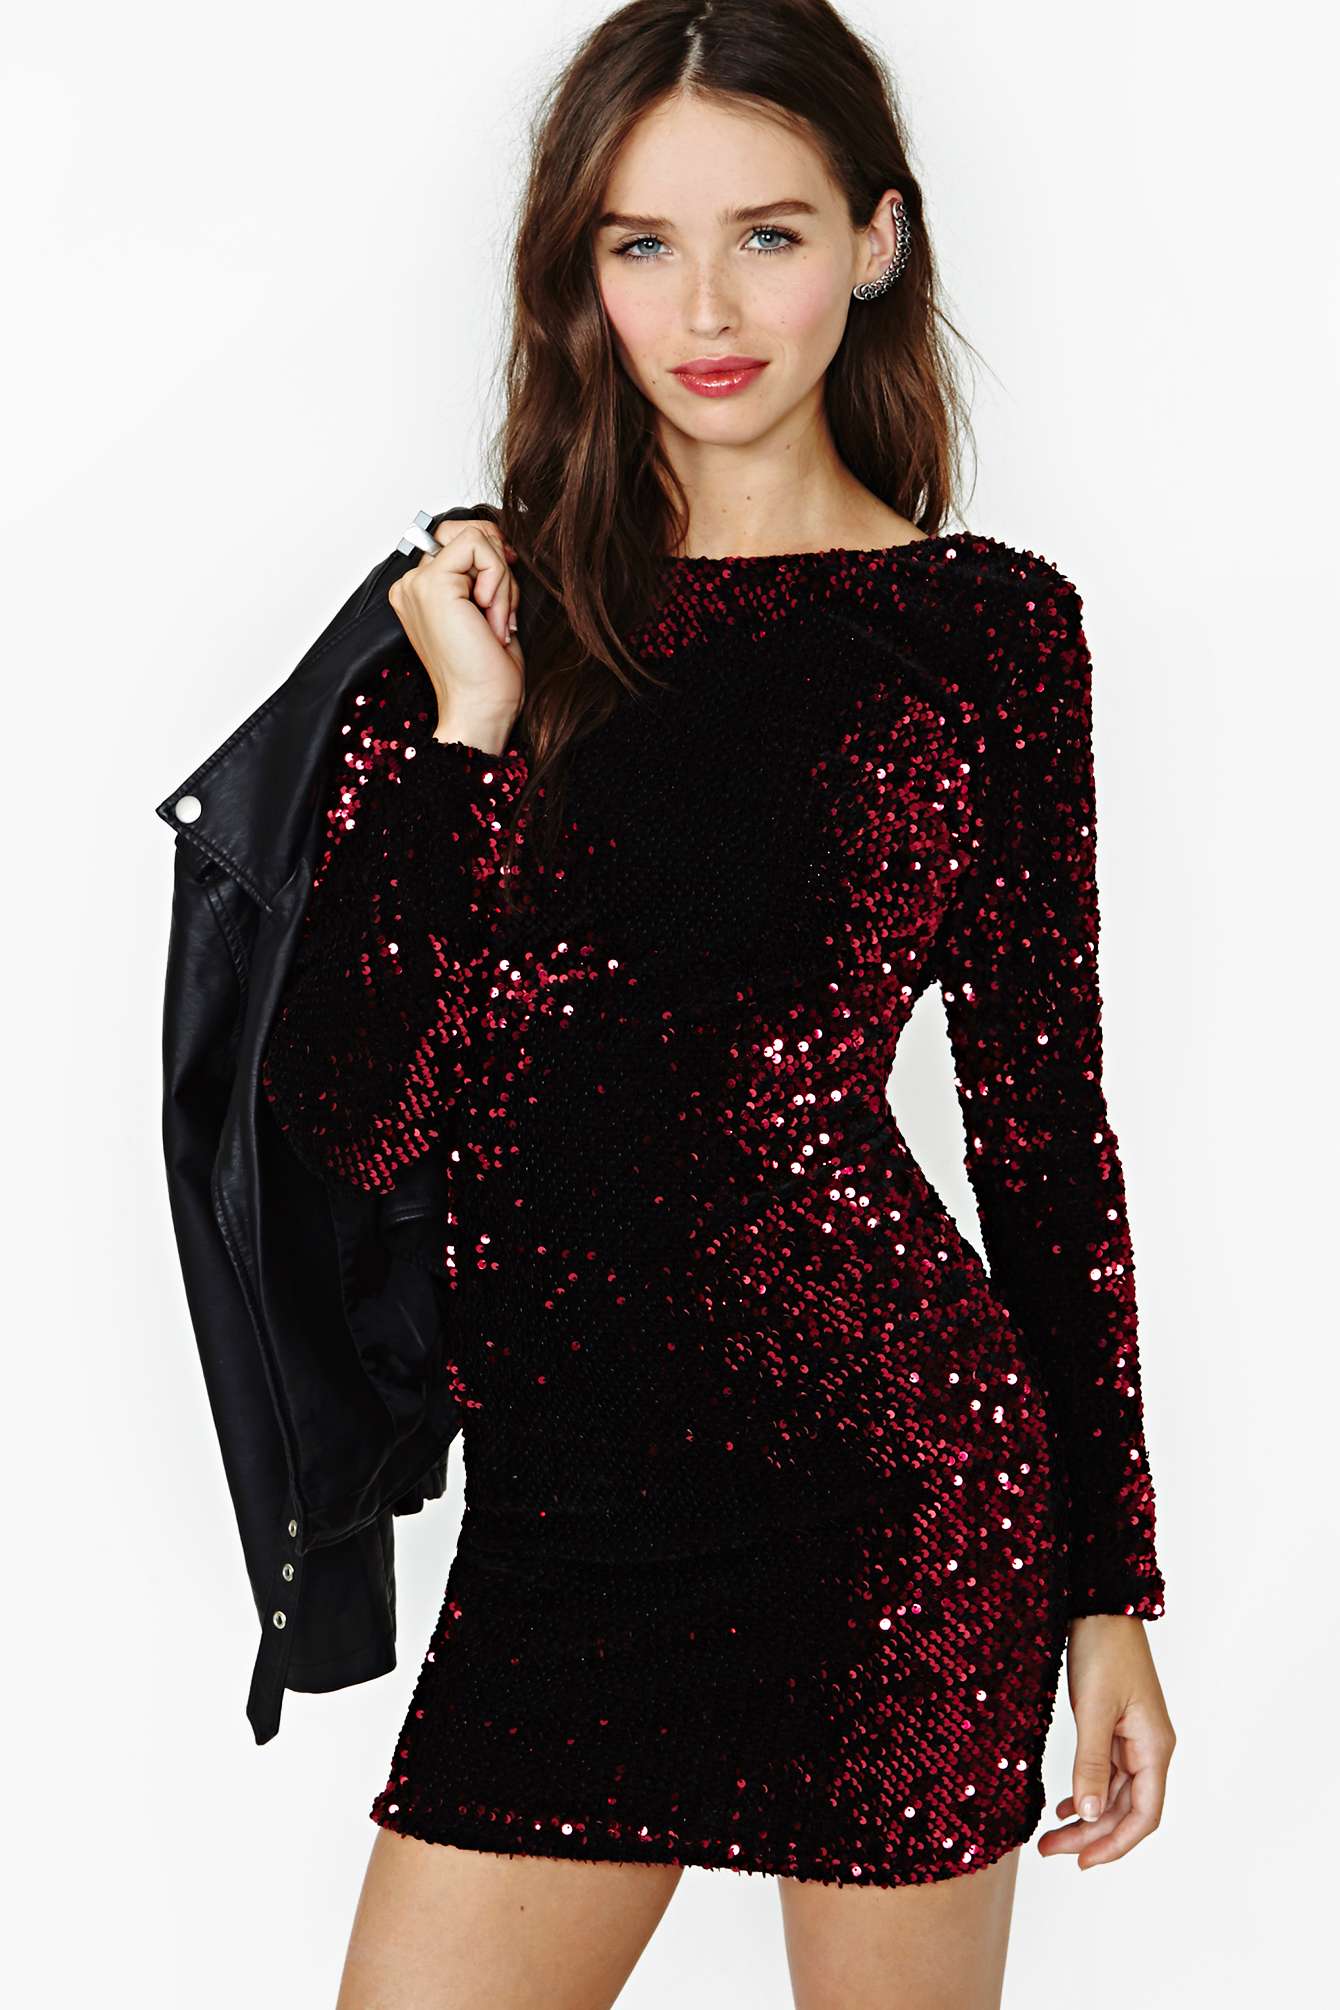 12 Killer Holiday Party Dresses To Looking Gorgeous